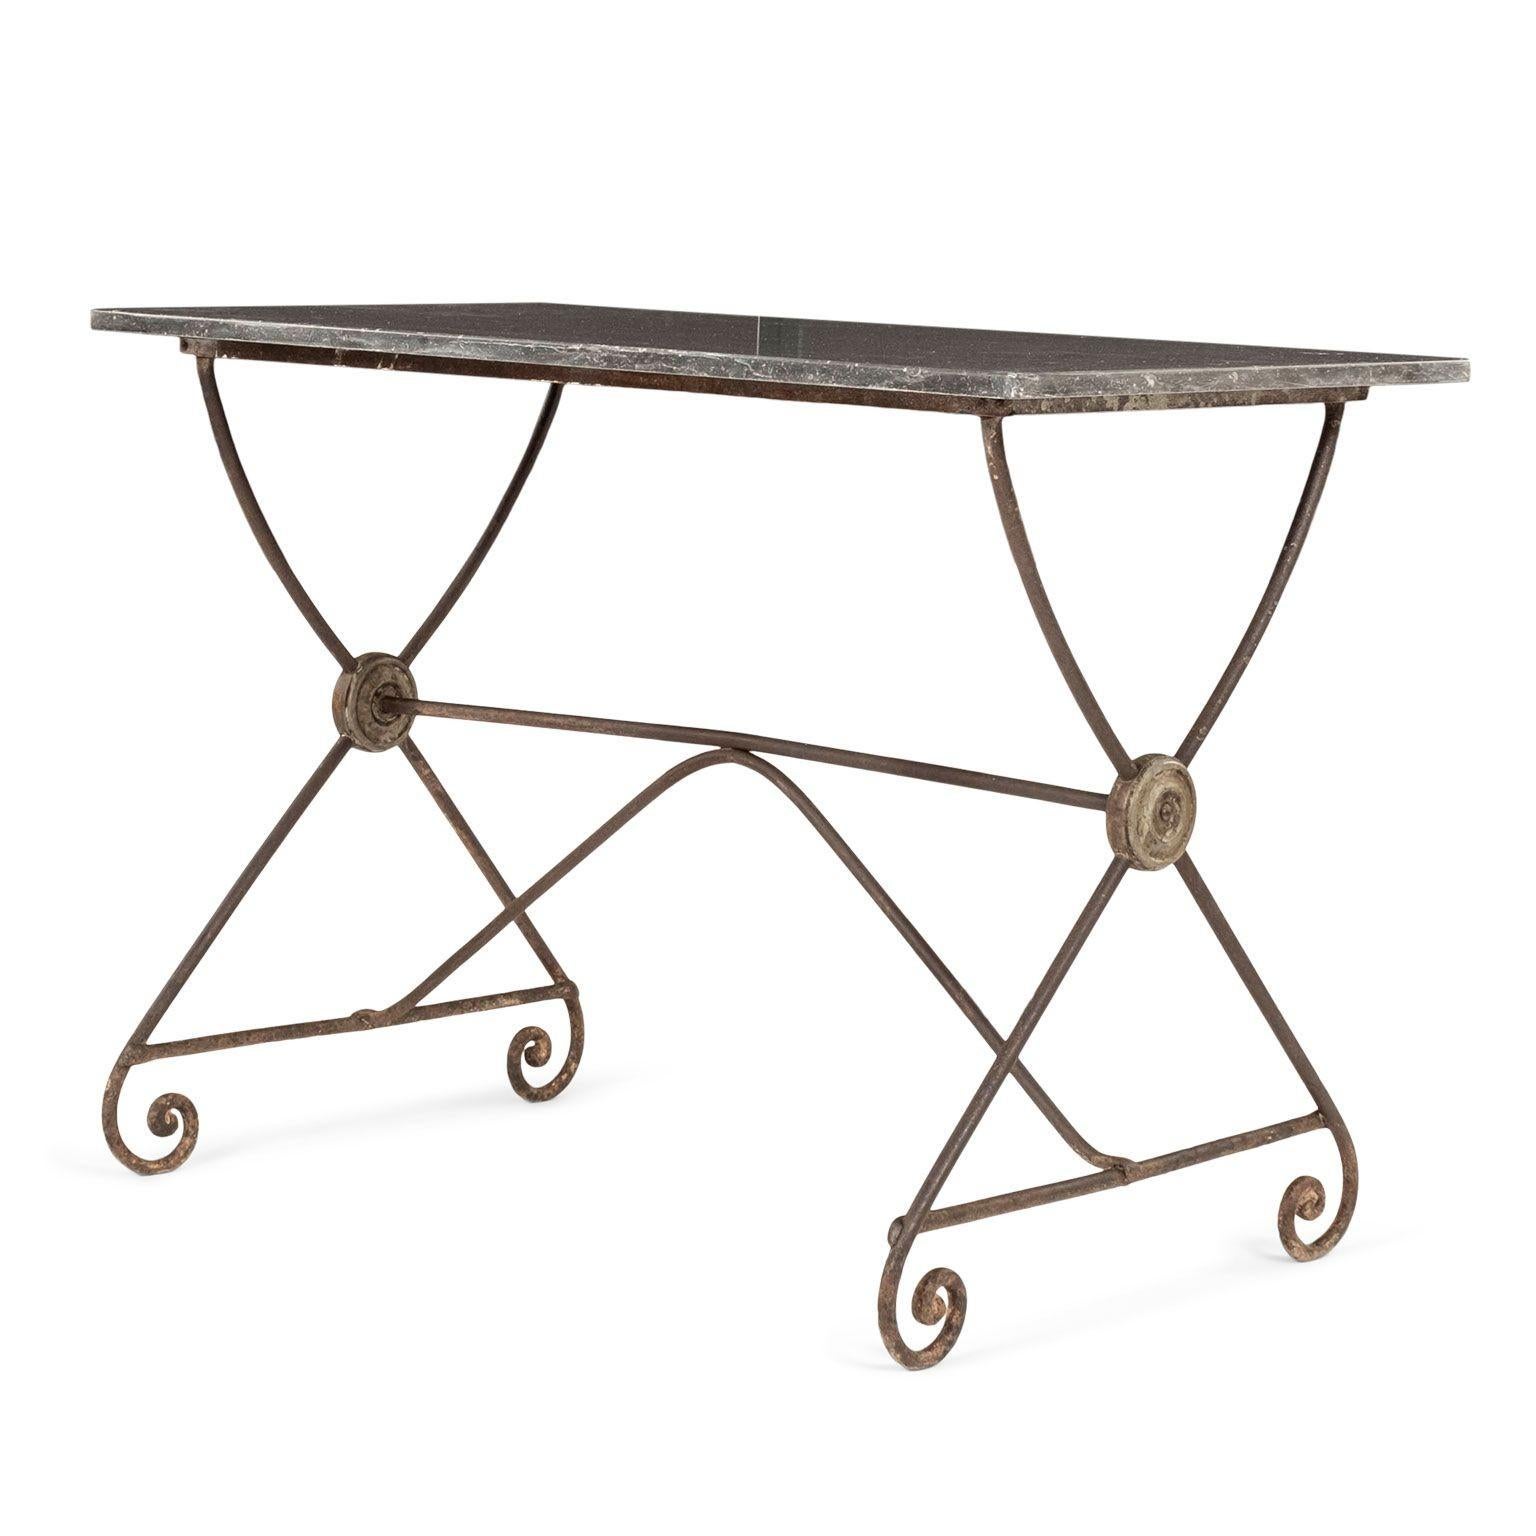 19th century rectangular iron trestle table and bluestone top circa 1870-1889, France. Neoclassical style forged iron trestle base supported by scrolled feet. Later black color bluestone rectangular top speckled with soft white/light gray veining.